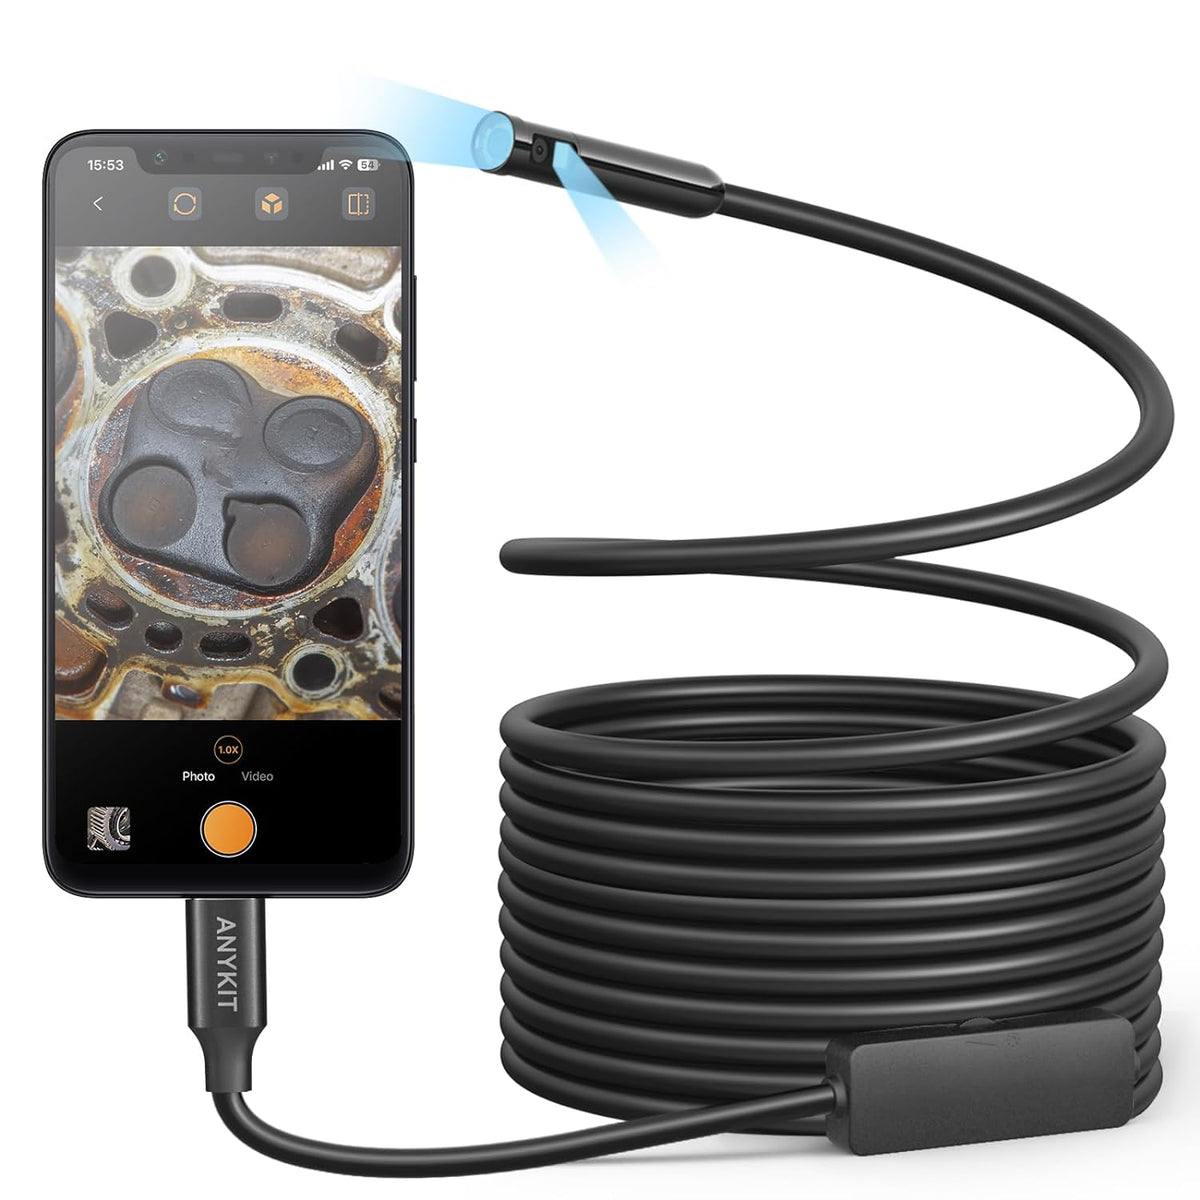 Dual Lens Endoscope Camera, Anykit 1.0MP Borescope with 8 LED Lights, Endoscope with 10ft Semi-Rigid Snake Camera, IP67 Waterproof Inspection Camera for for iPhone, iPad, OTG Android Phone